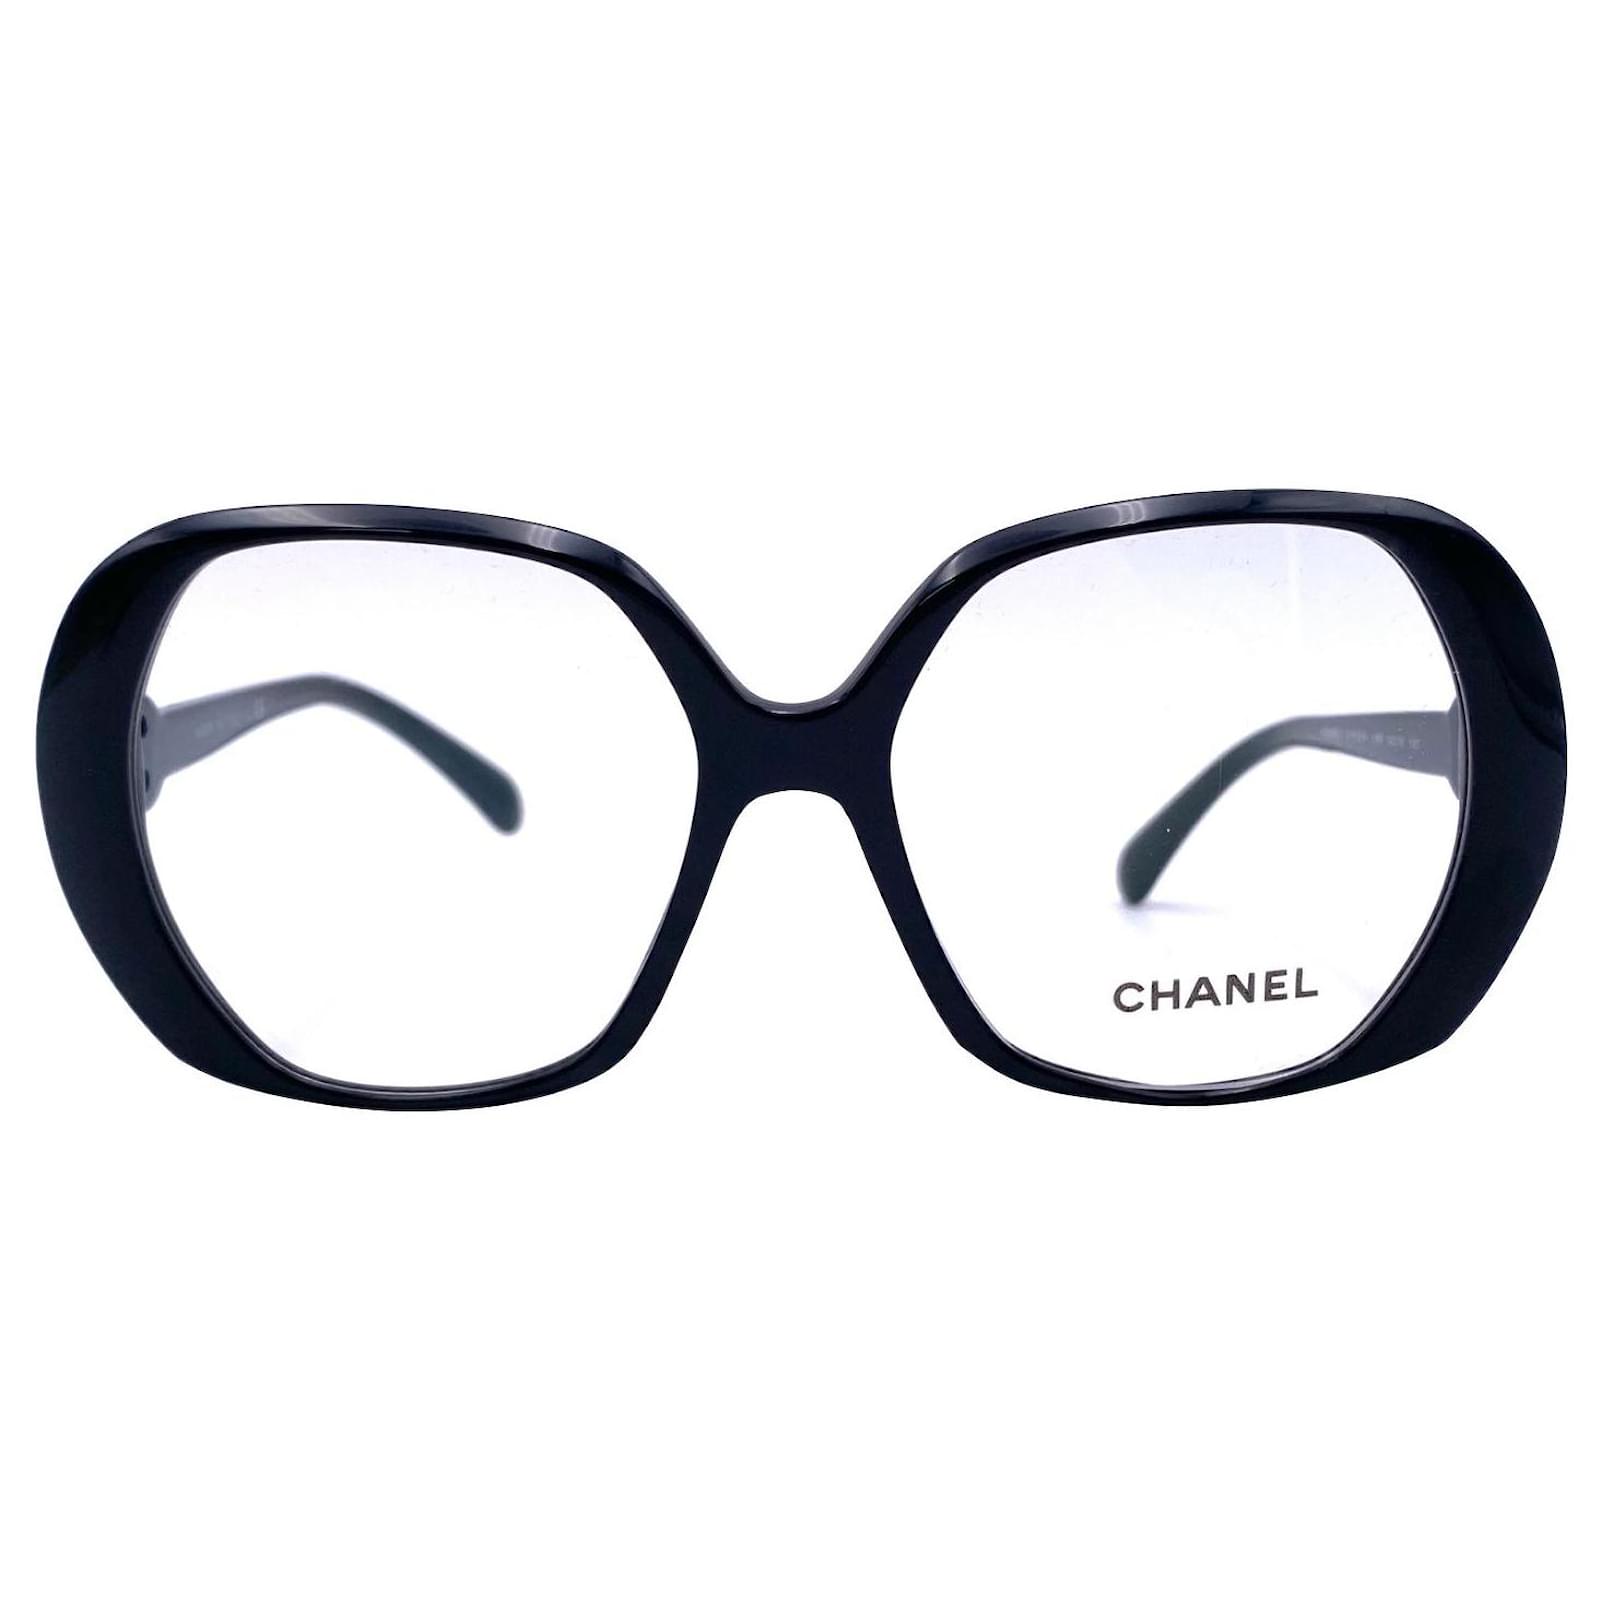 Authentic New CHANEL Square Sunglasses with Removable Double Hanging Chain   eBay